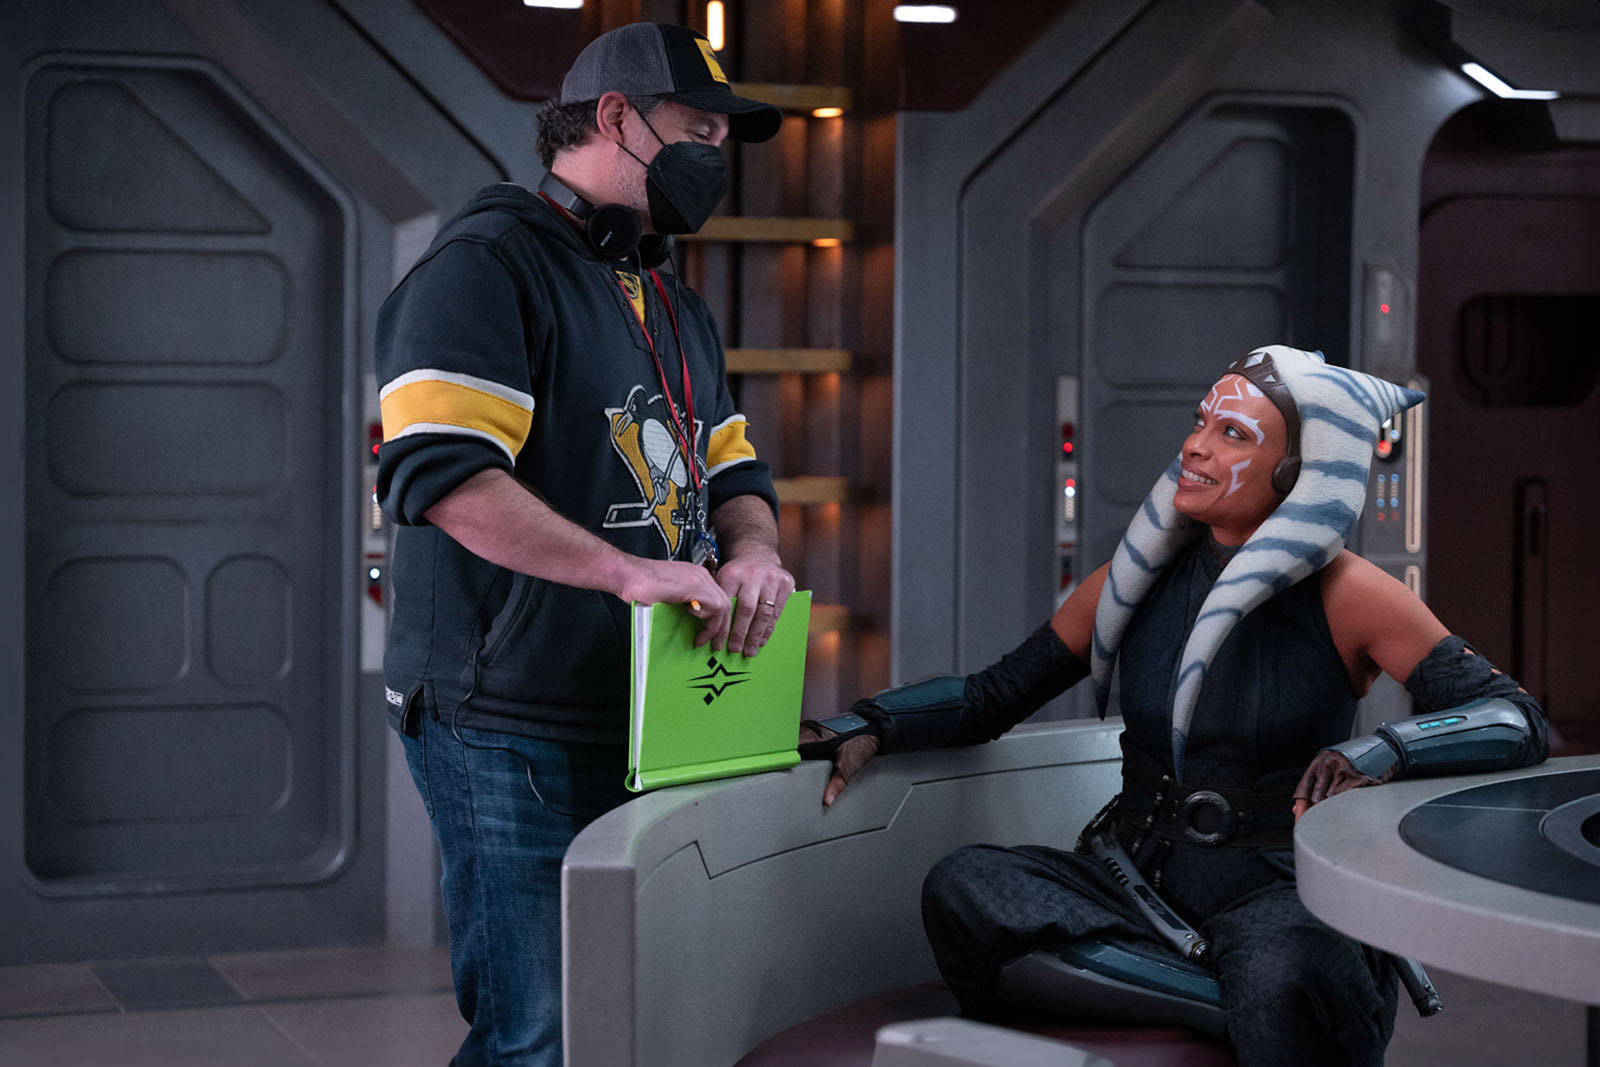 Director Dave Filoni shares a moment with Dawson on the set of Ahsoka.